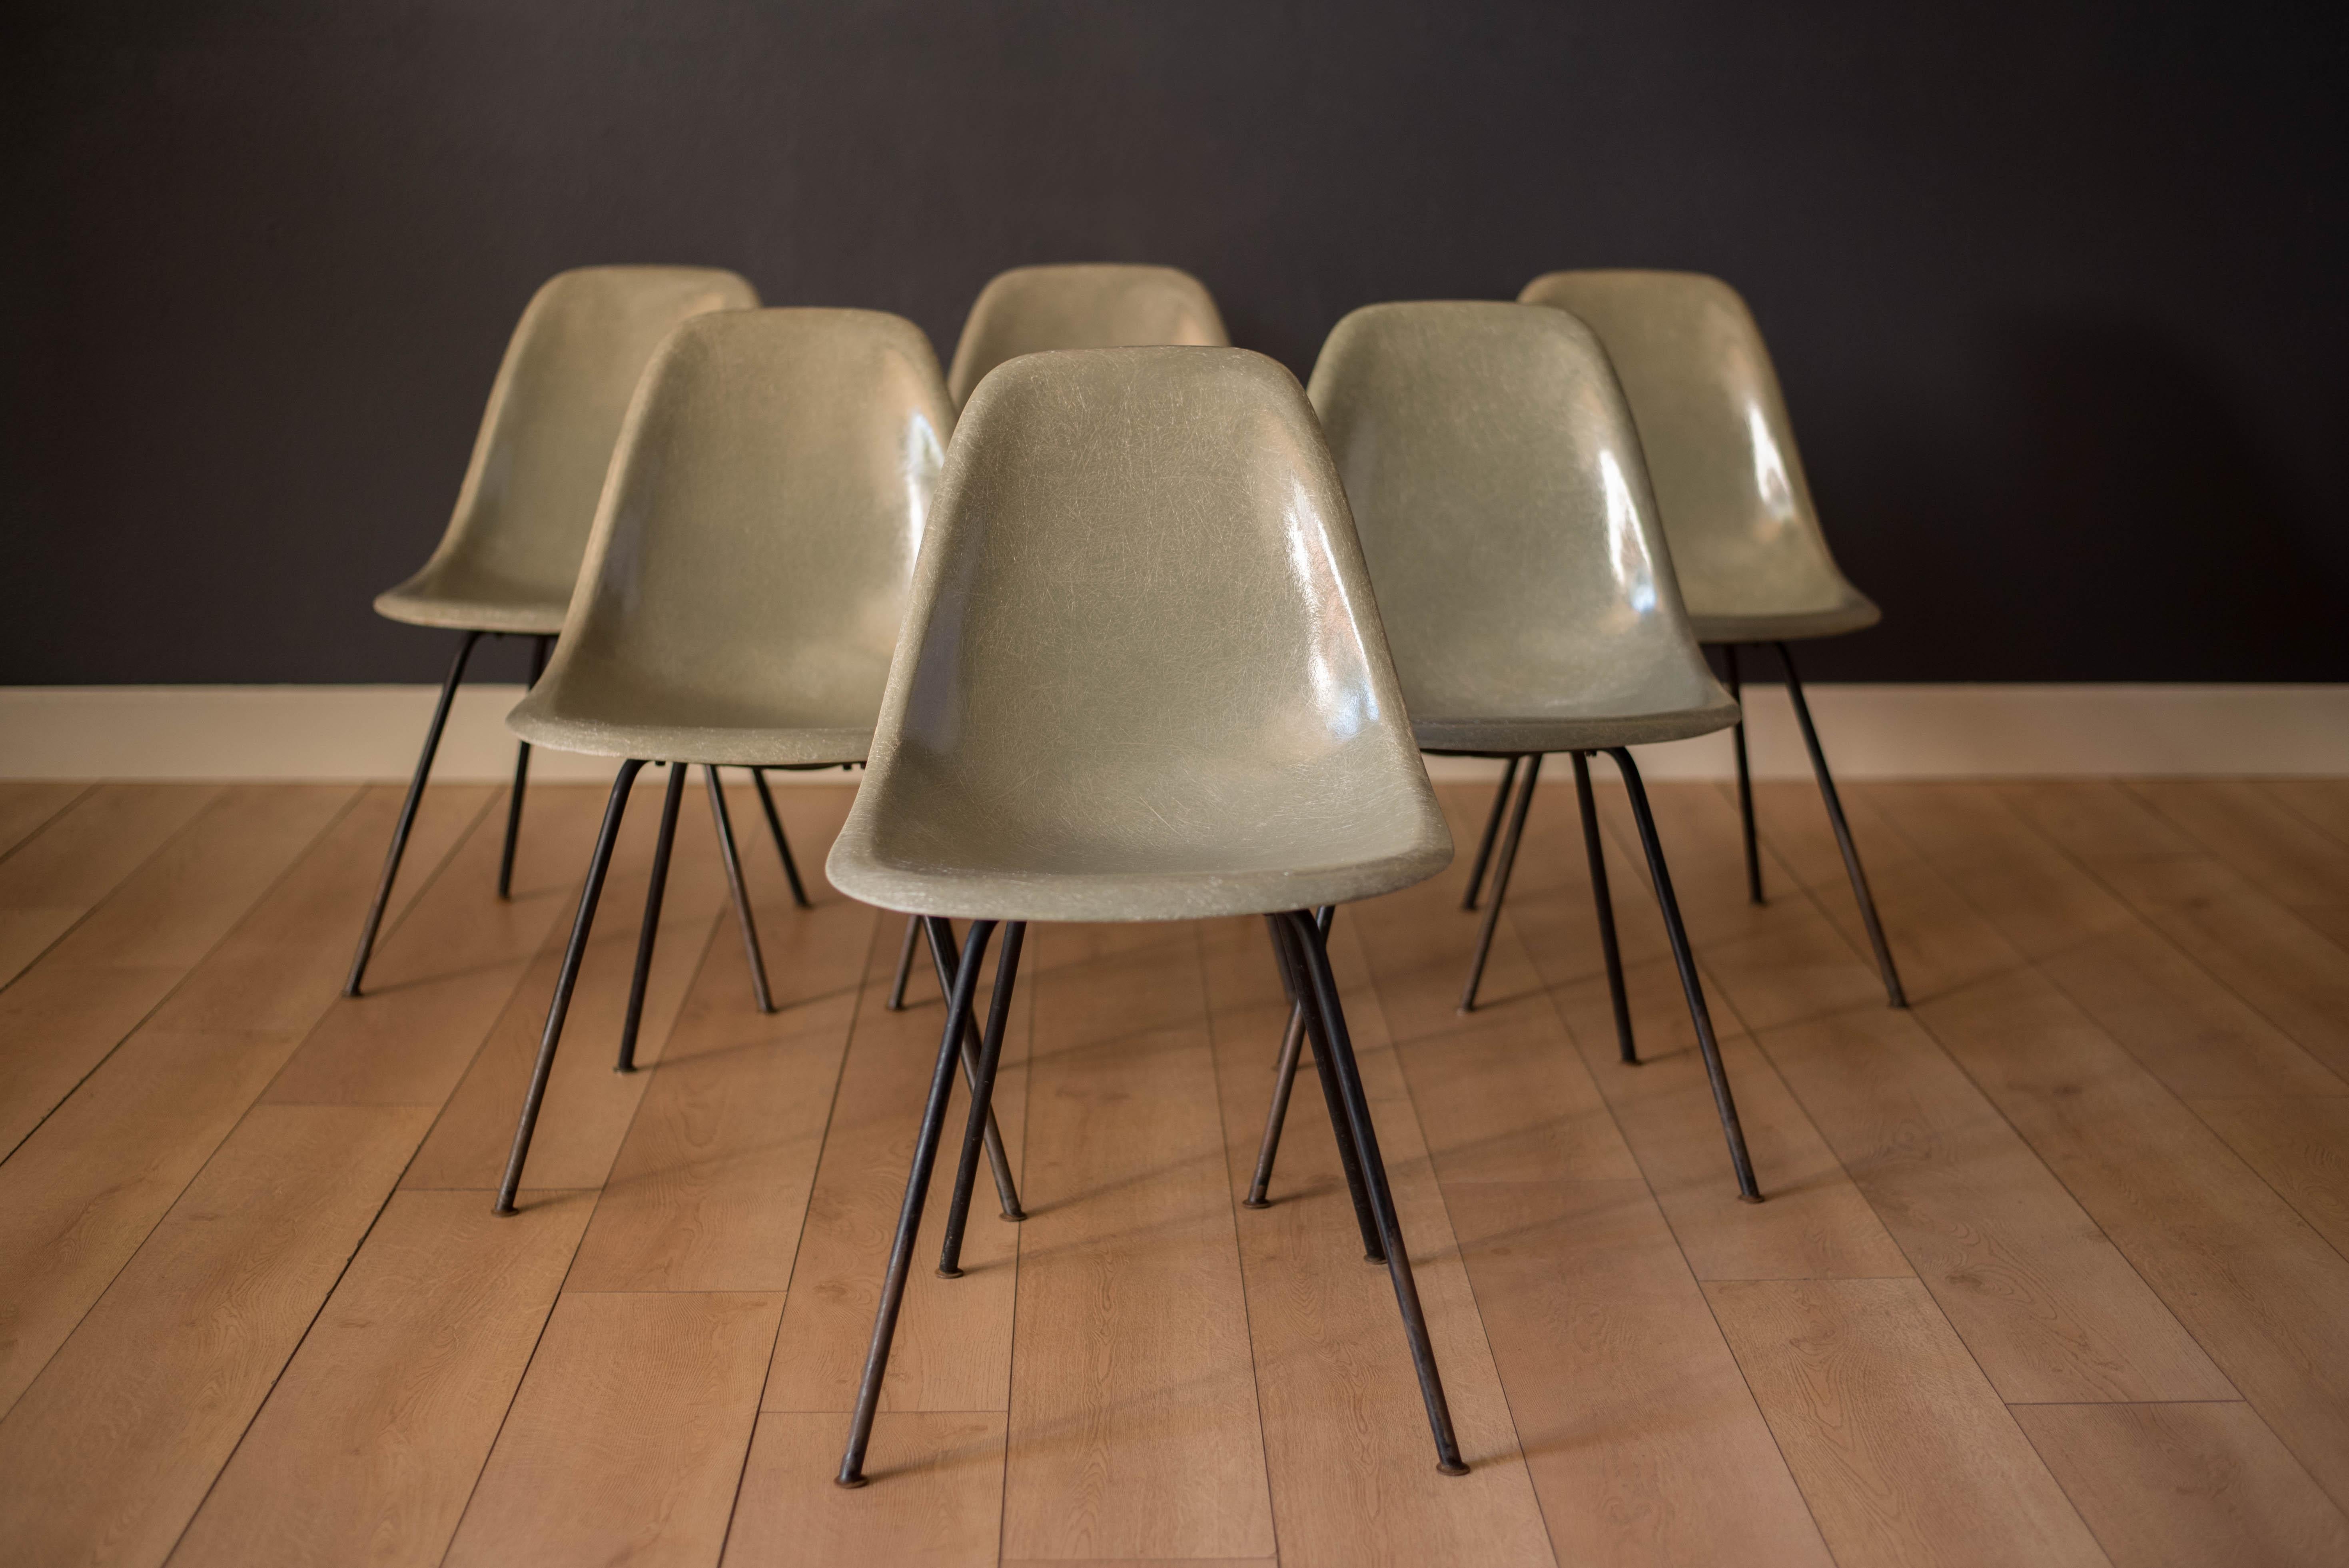 Mid-Century Modern first generation DSX side chairs by Ray and Charles Eames for Herman Miller circa 1950s. This collectible set features seafoam green fiberglass colored shells supported by the original heavy black steel framed X-base. Price is for